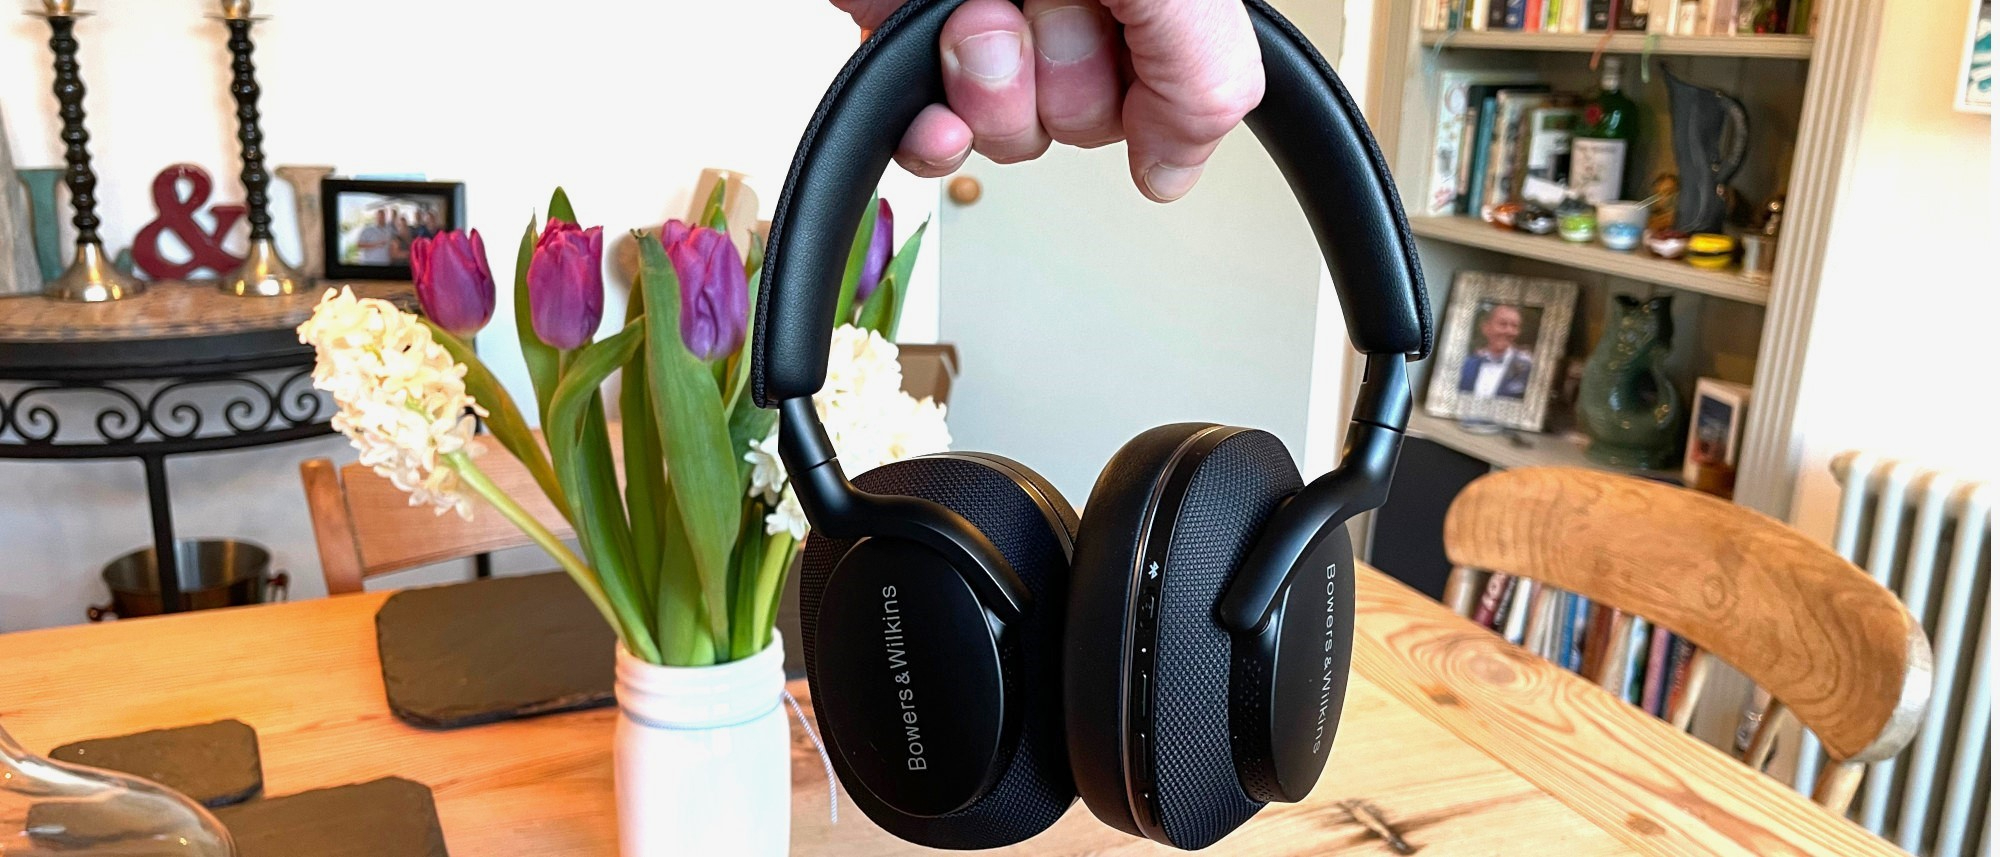 The E is for Evolved: Bowers & Wilkins Px7 S2e Headphones Review